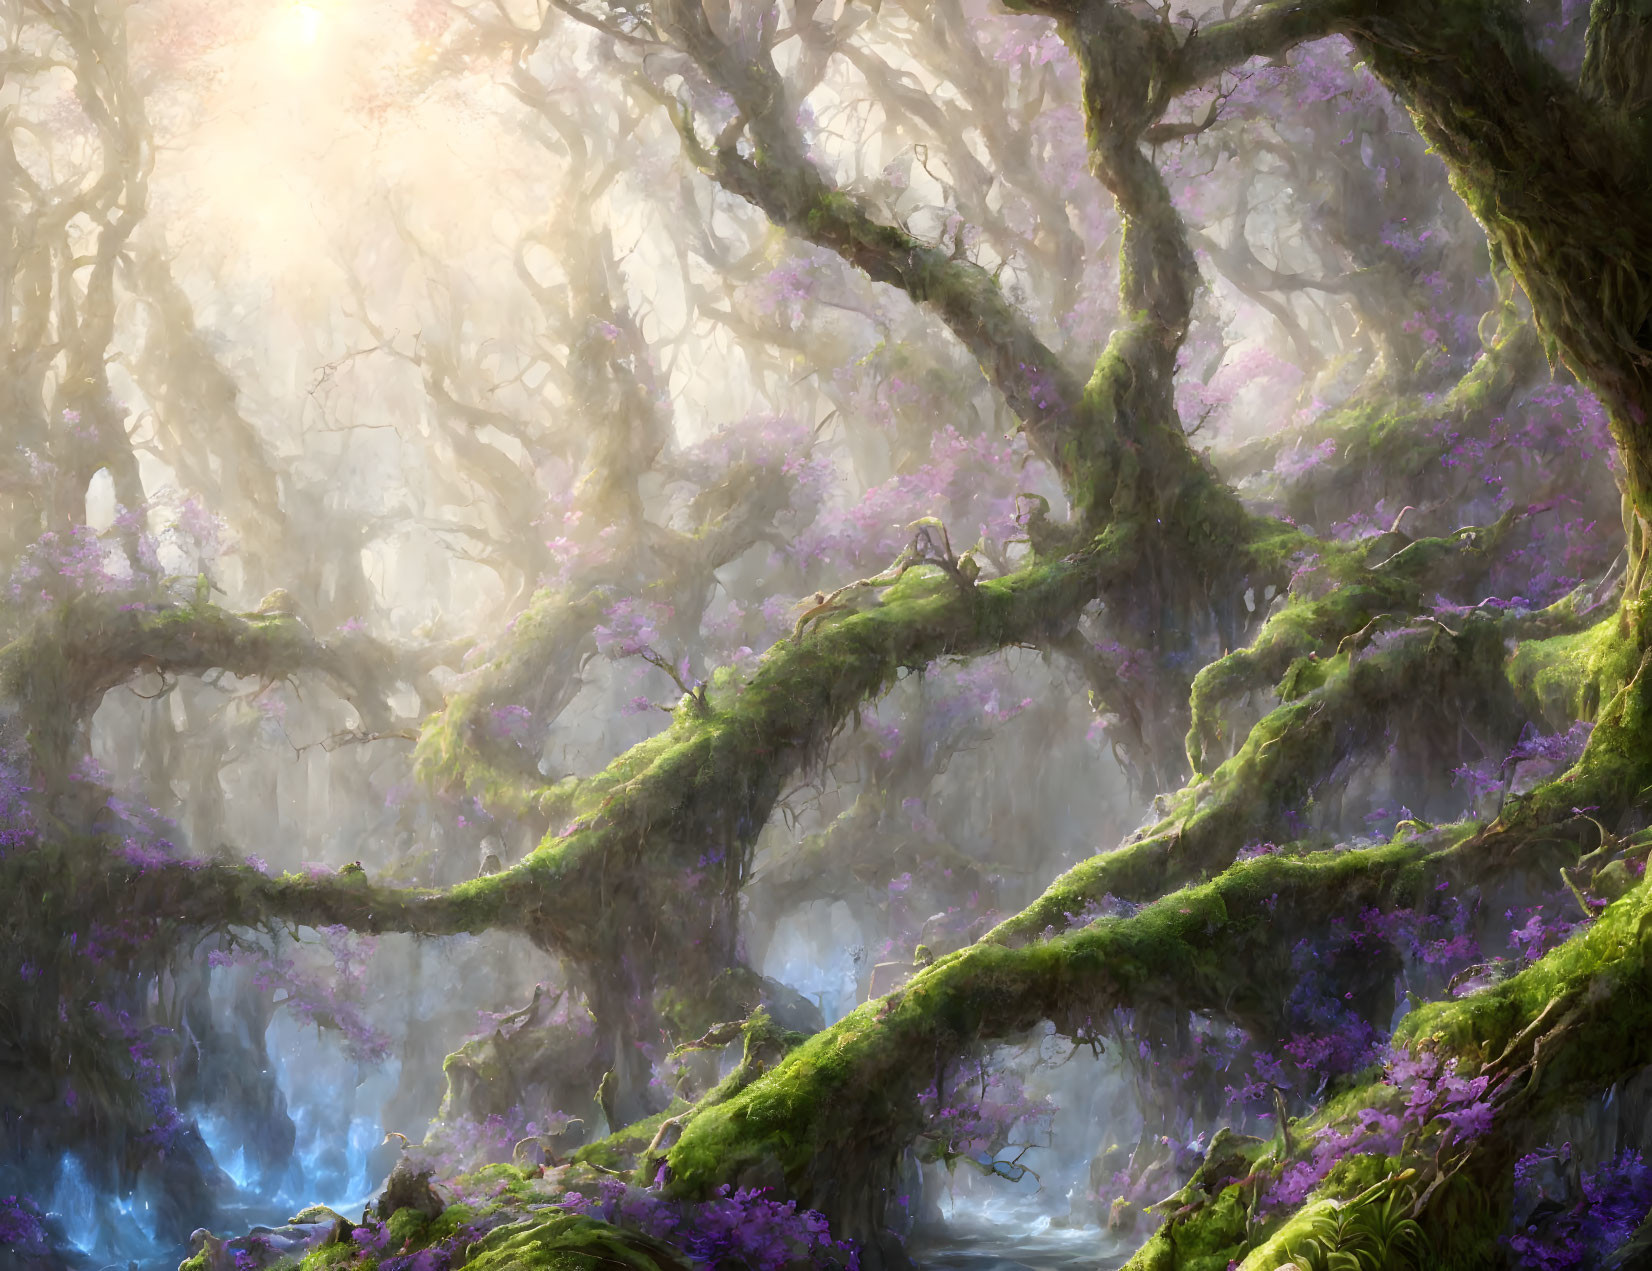 Mystical forest with sunlight, moss-covered branches, and purple flowers